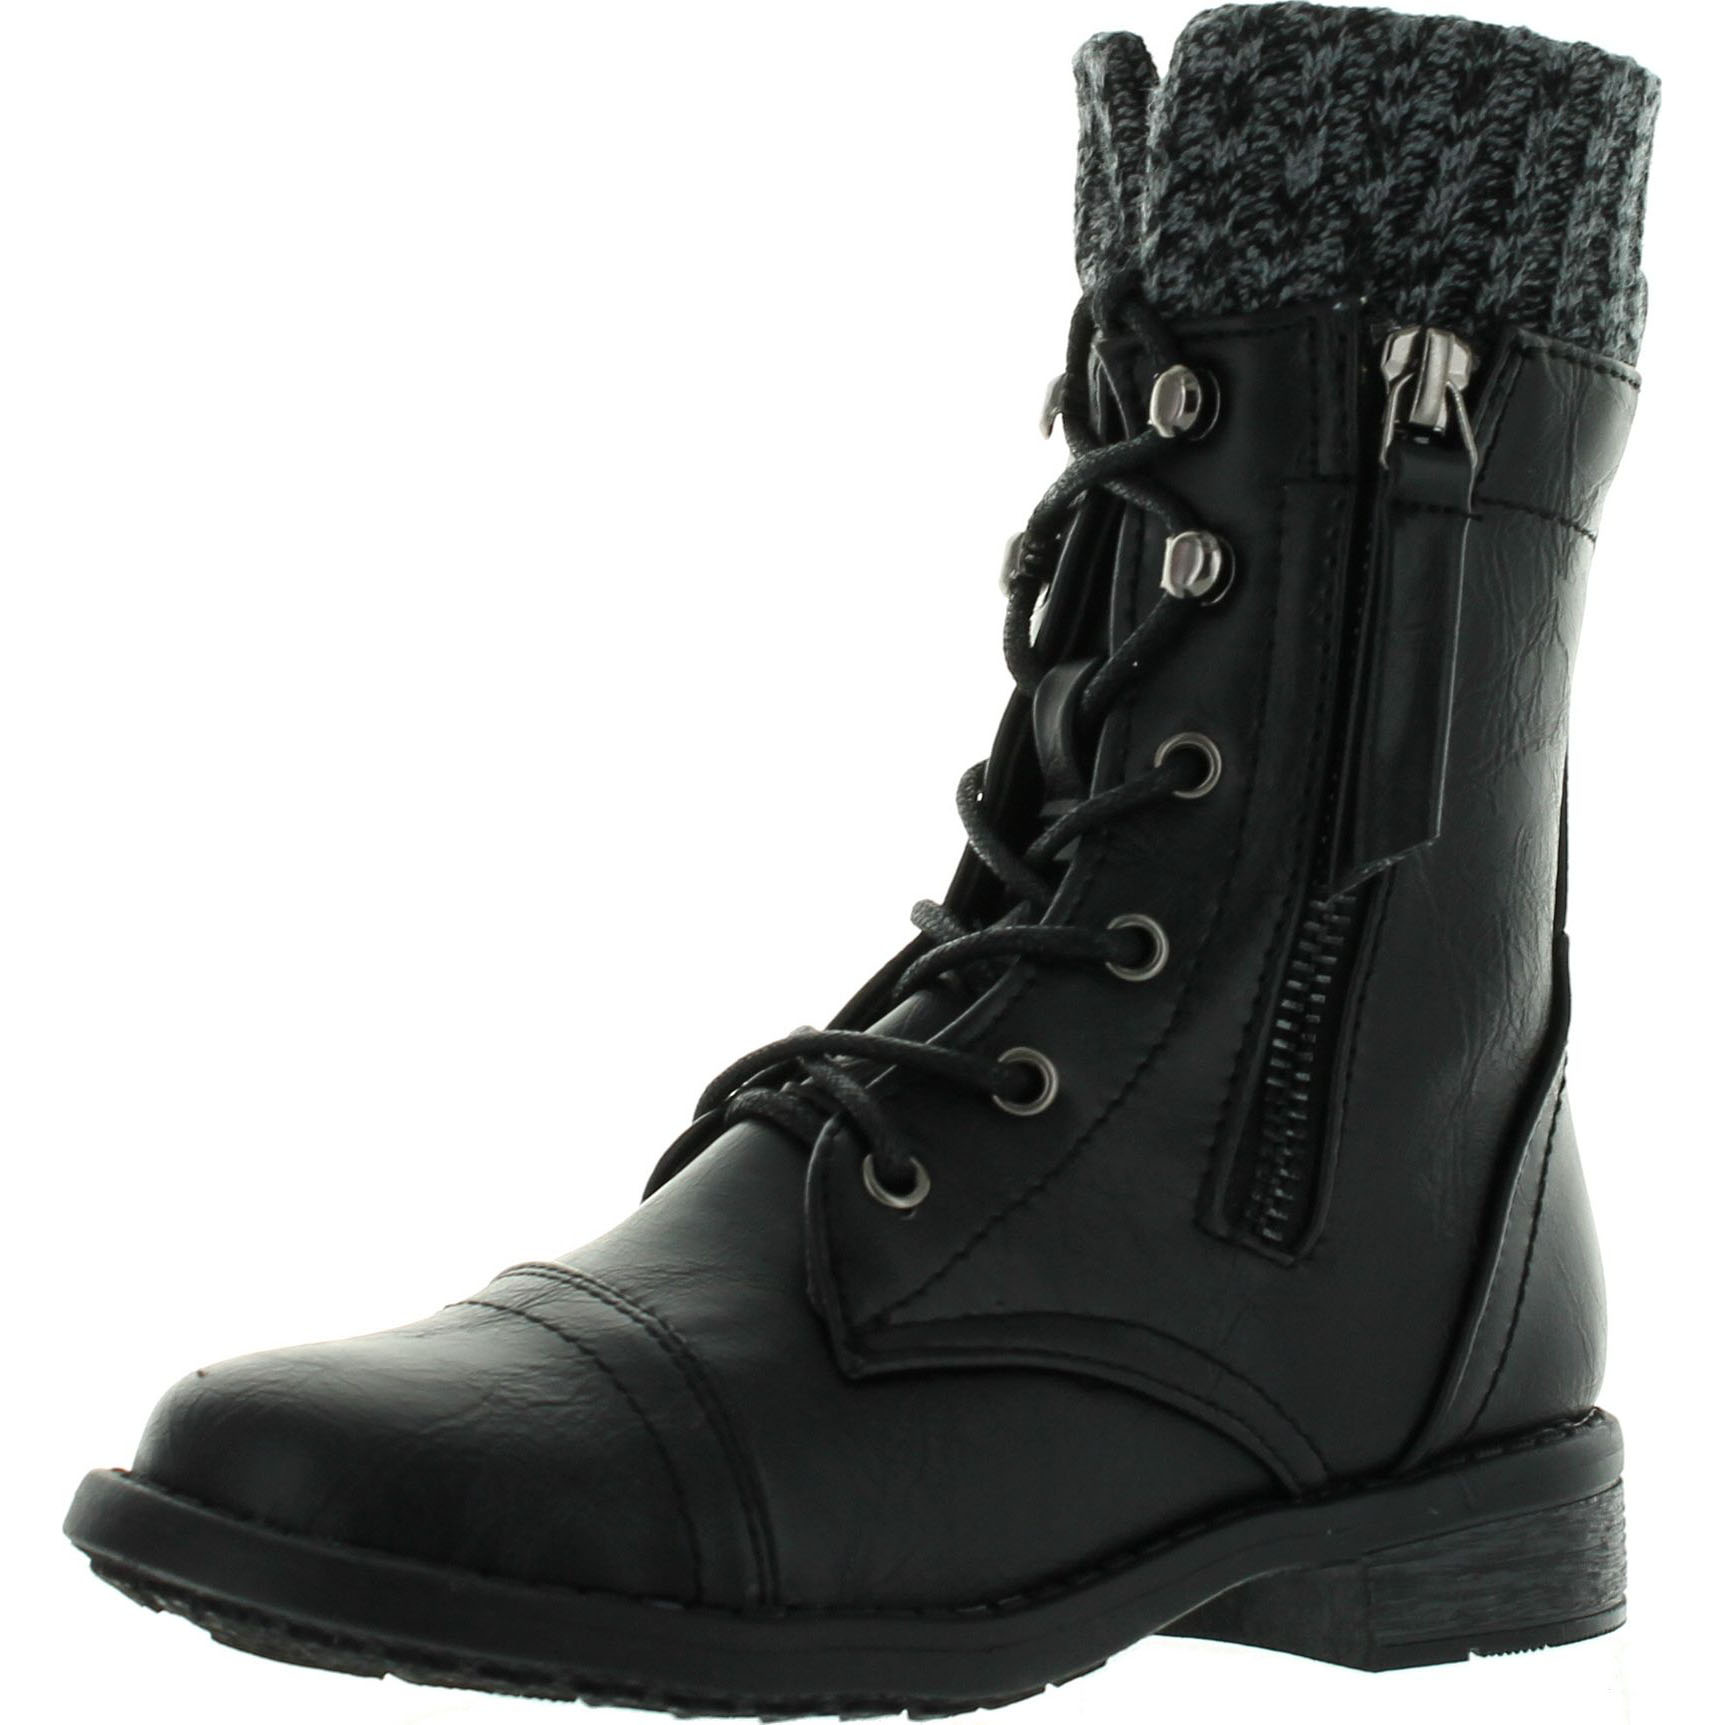 Static Footwear Link Girls Justina58k Kids Leatherette Sweater Cuff Lace Up Zip Decor Mid Calf Ankle Combat Boots